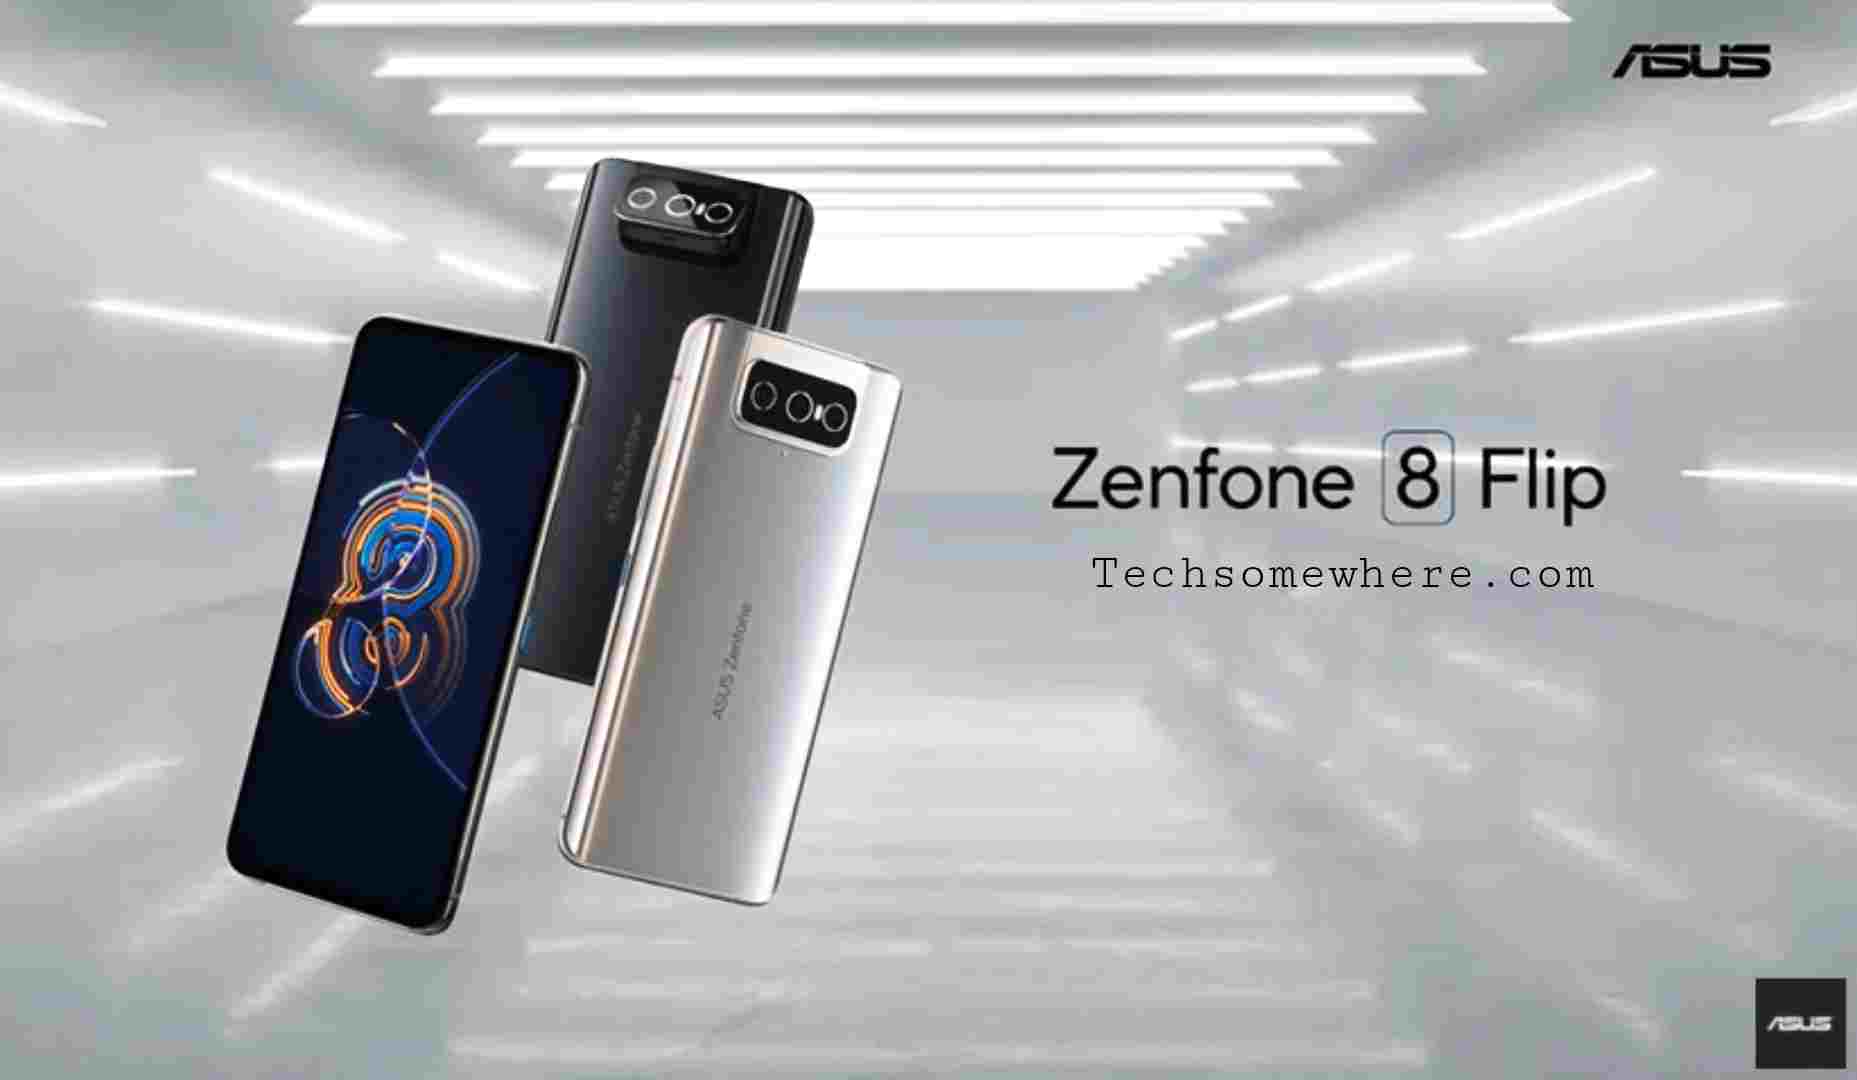 Asus Zenfone 8 Flip Price, All Features & Interesting facts!